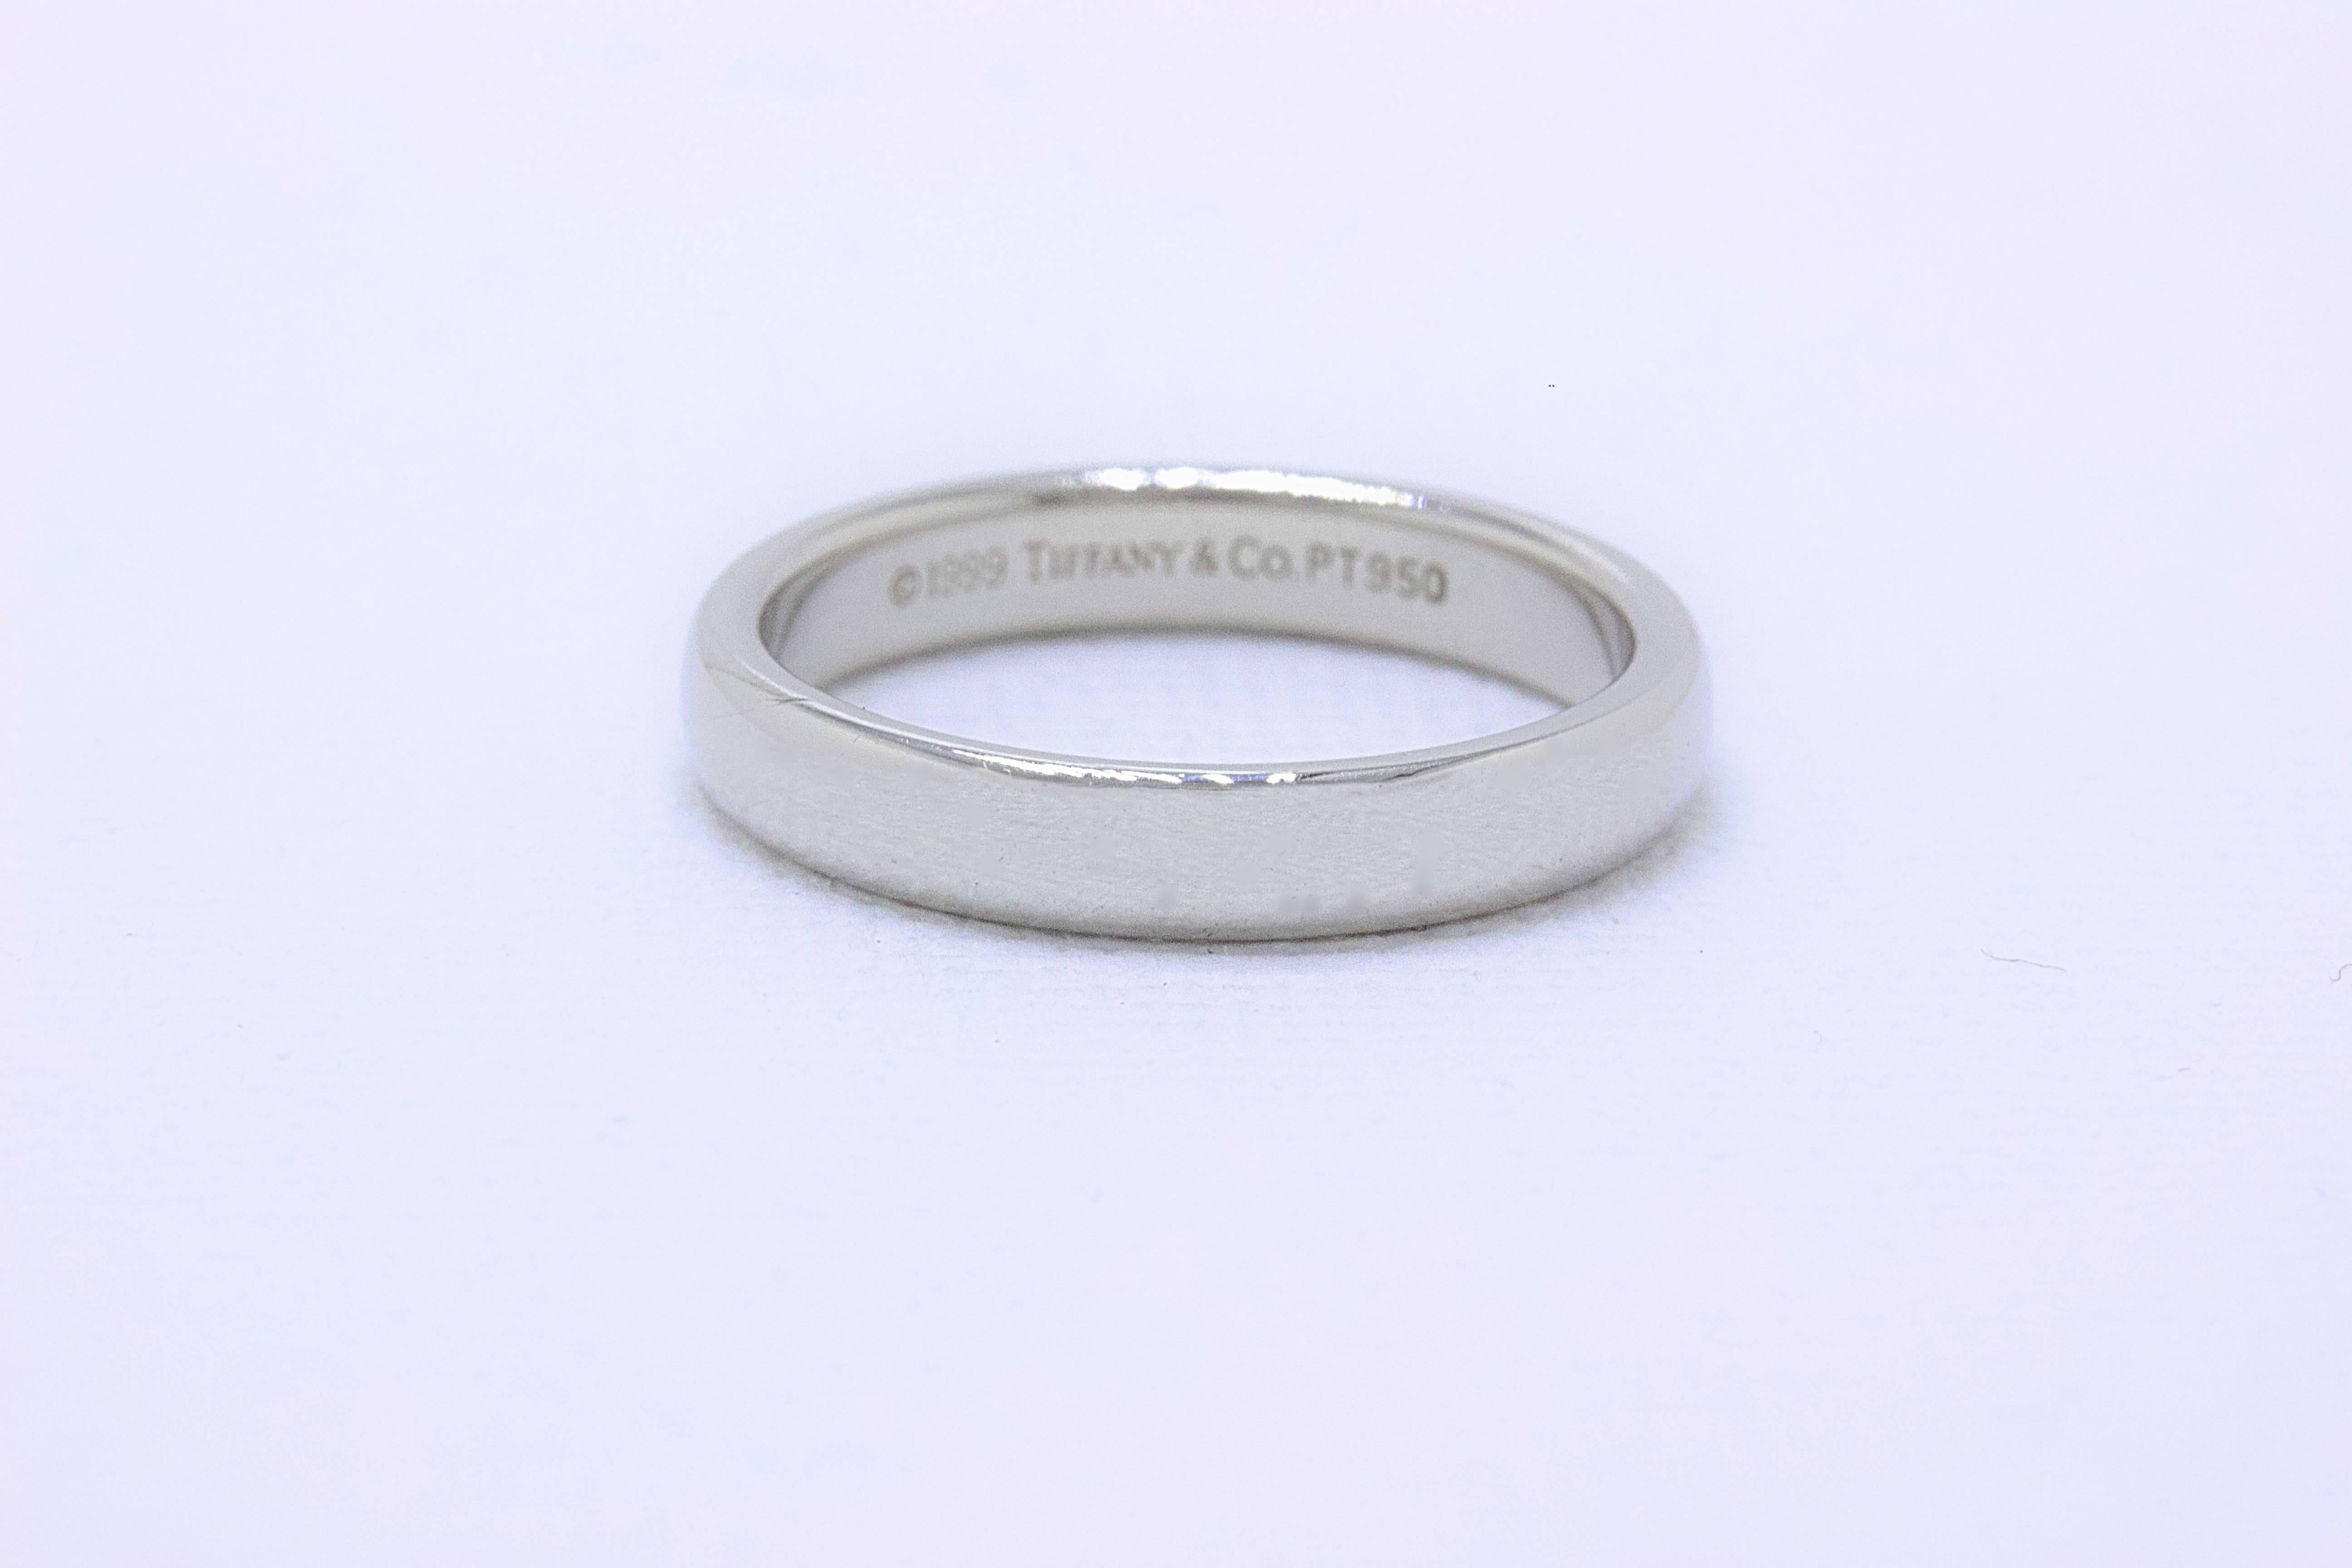 Tiffany & Co.
Style:  Lucida Wedding Band
SKU Number:  14761594
Metal:  Platinum PT950
Size:  4.5 - sizable  
Width:  3 MM  
Hallmark:  ©TIFFANY&CO.PT950
Includes:  Tiffany & Co. Jewelry Pouch

Retail Value:  $1,150 + tax = $1,239.12